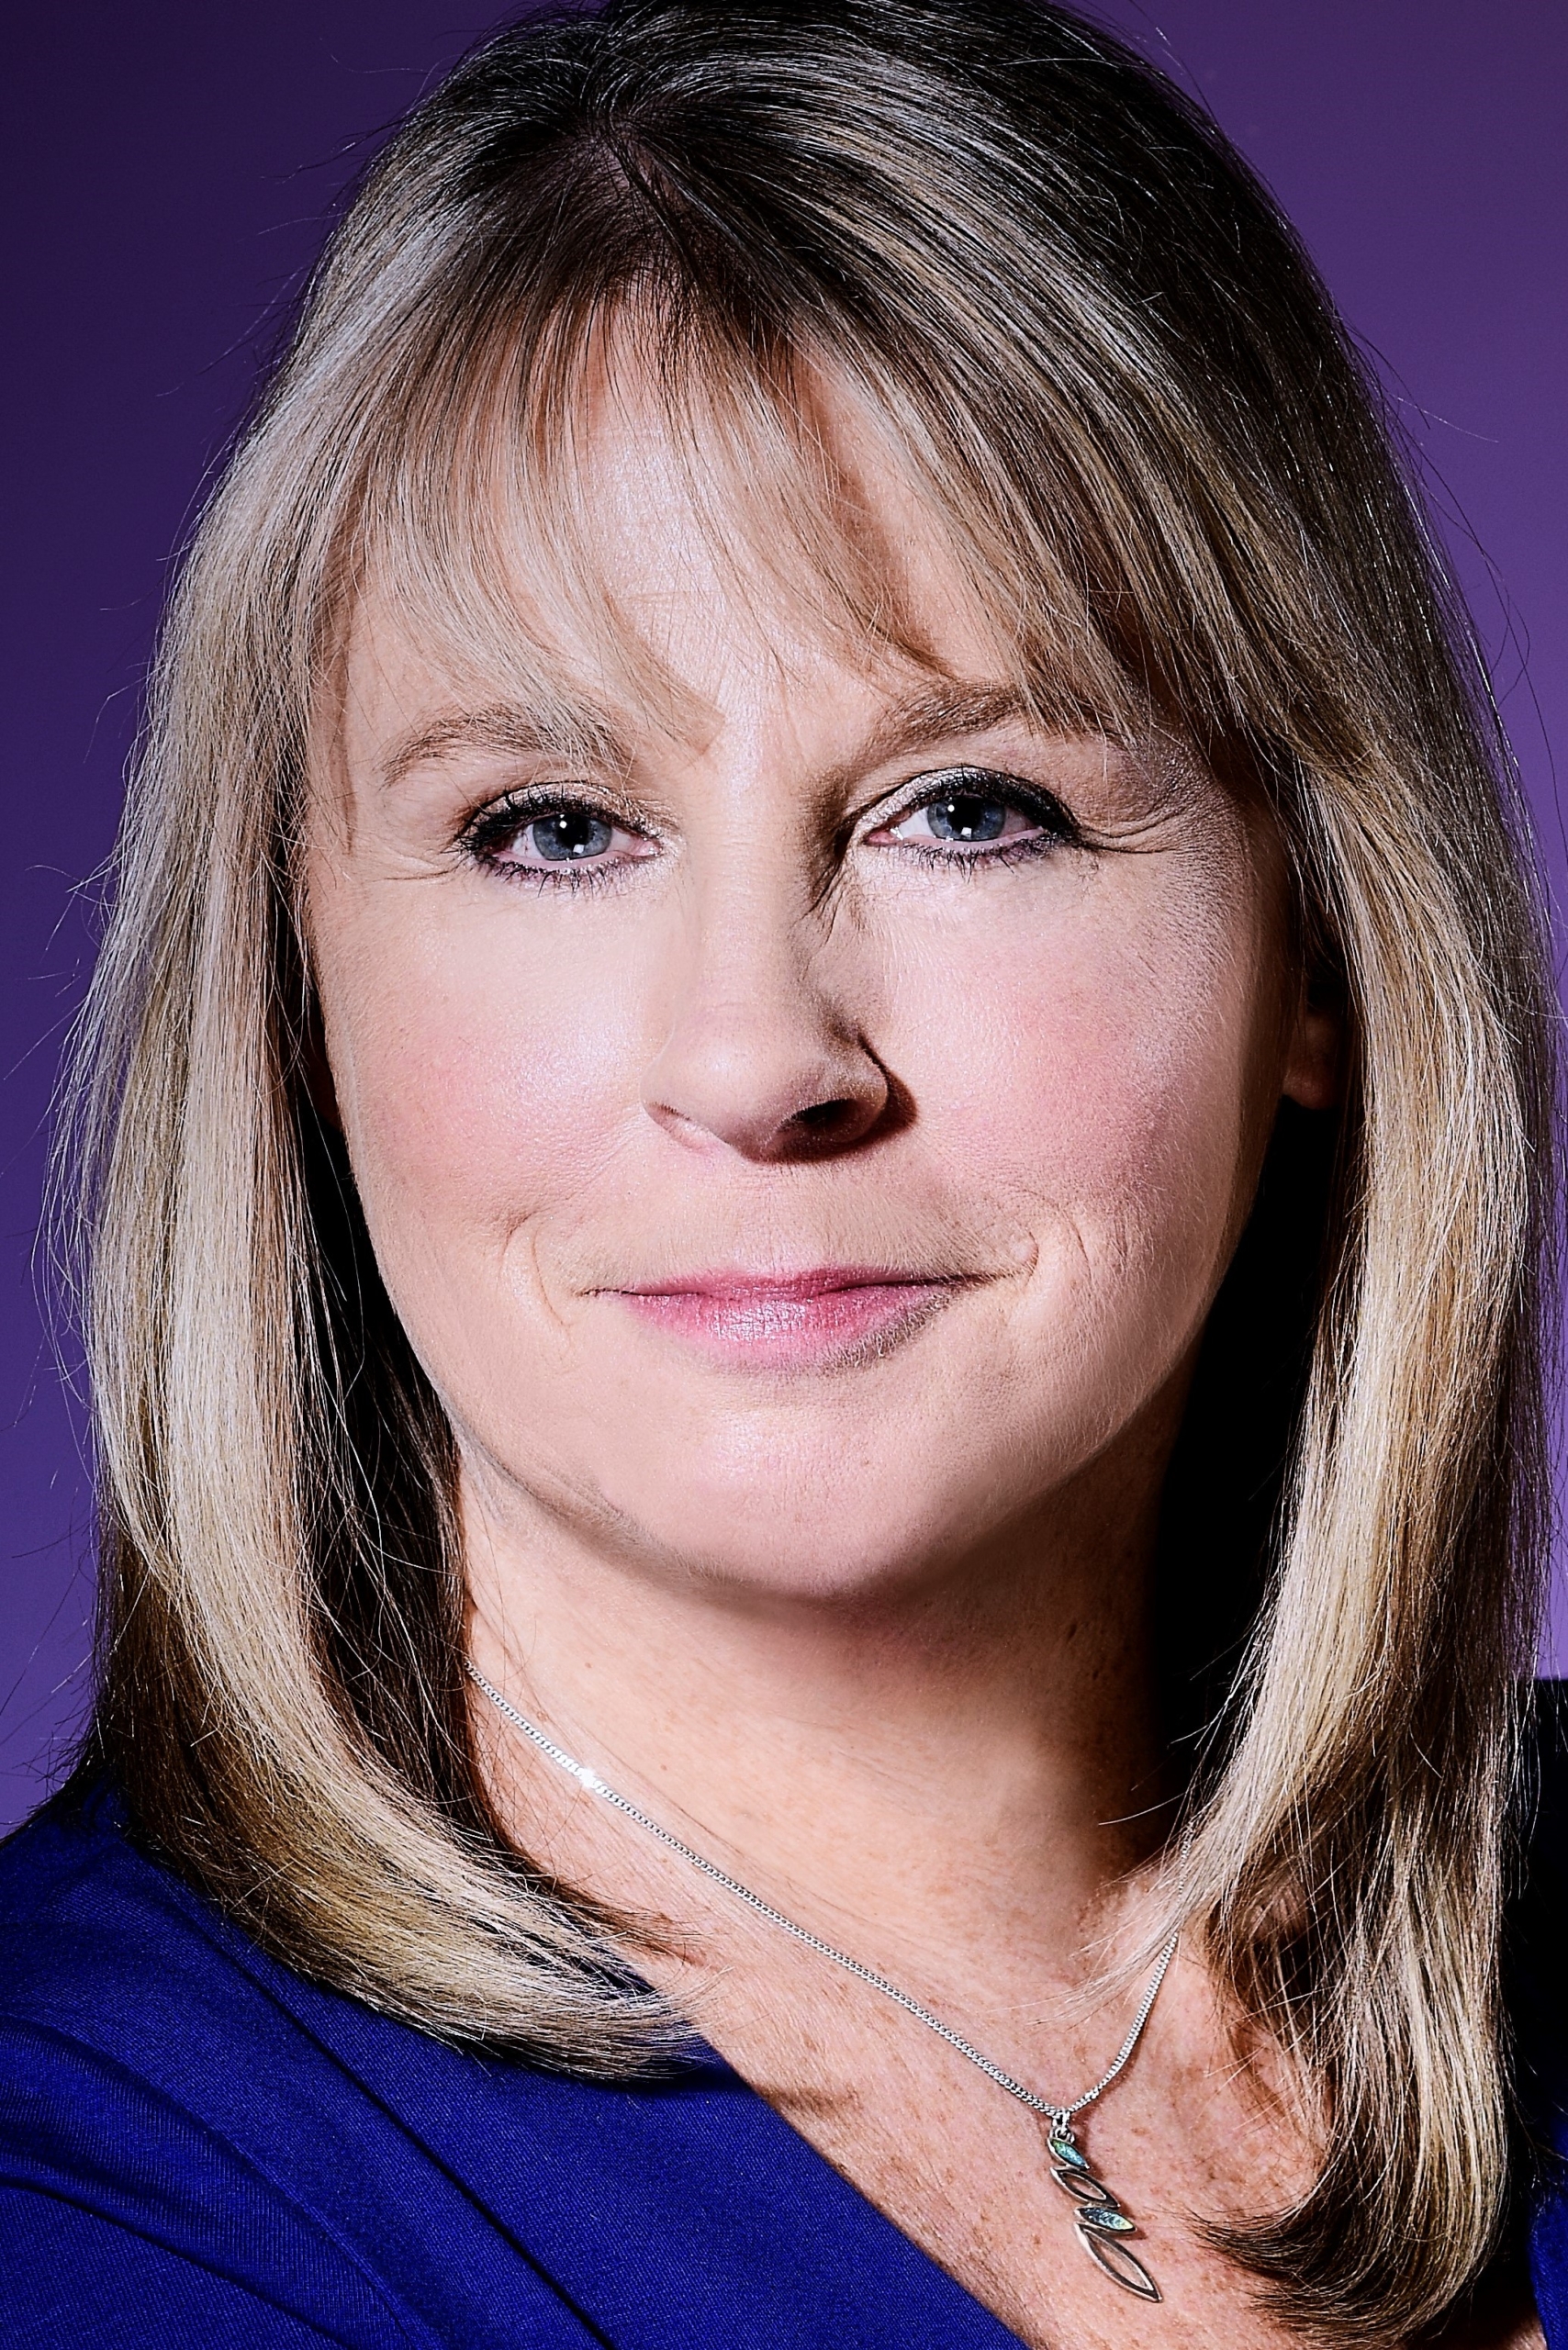 Debbie Foster, a woman wearing a blue shirt and silver necklace with dark blonde shoulder-length hair and a fringe looks at the camera and smiles. The background is dark purple.